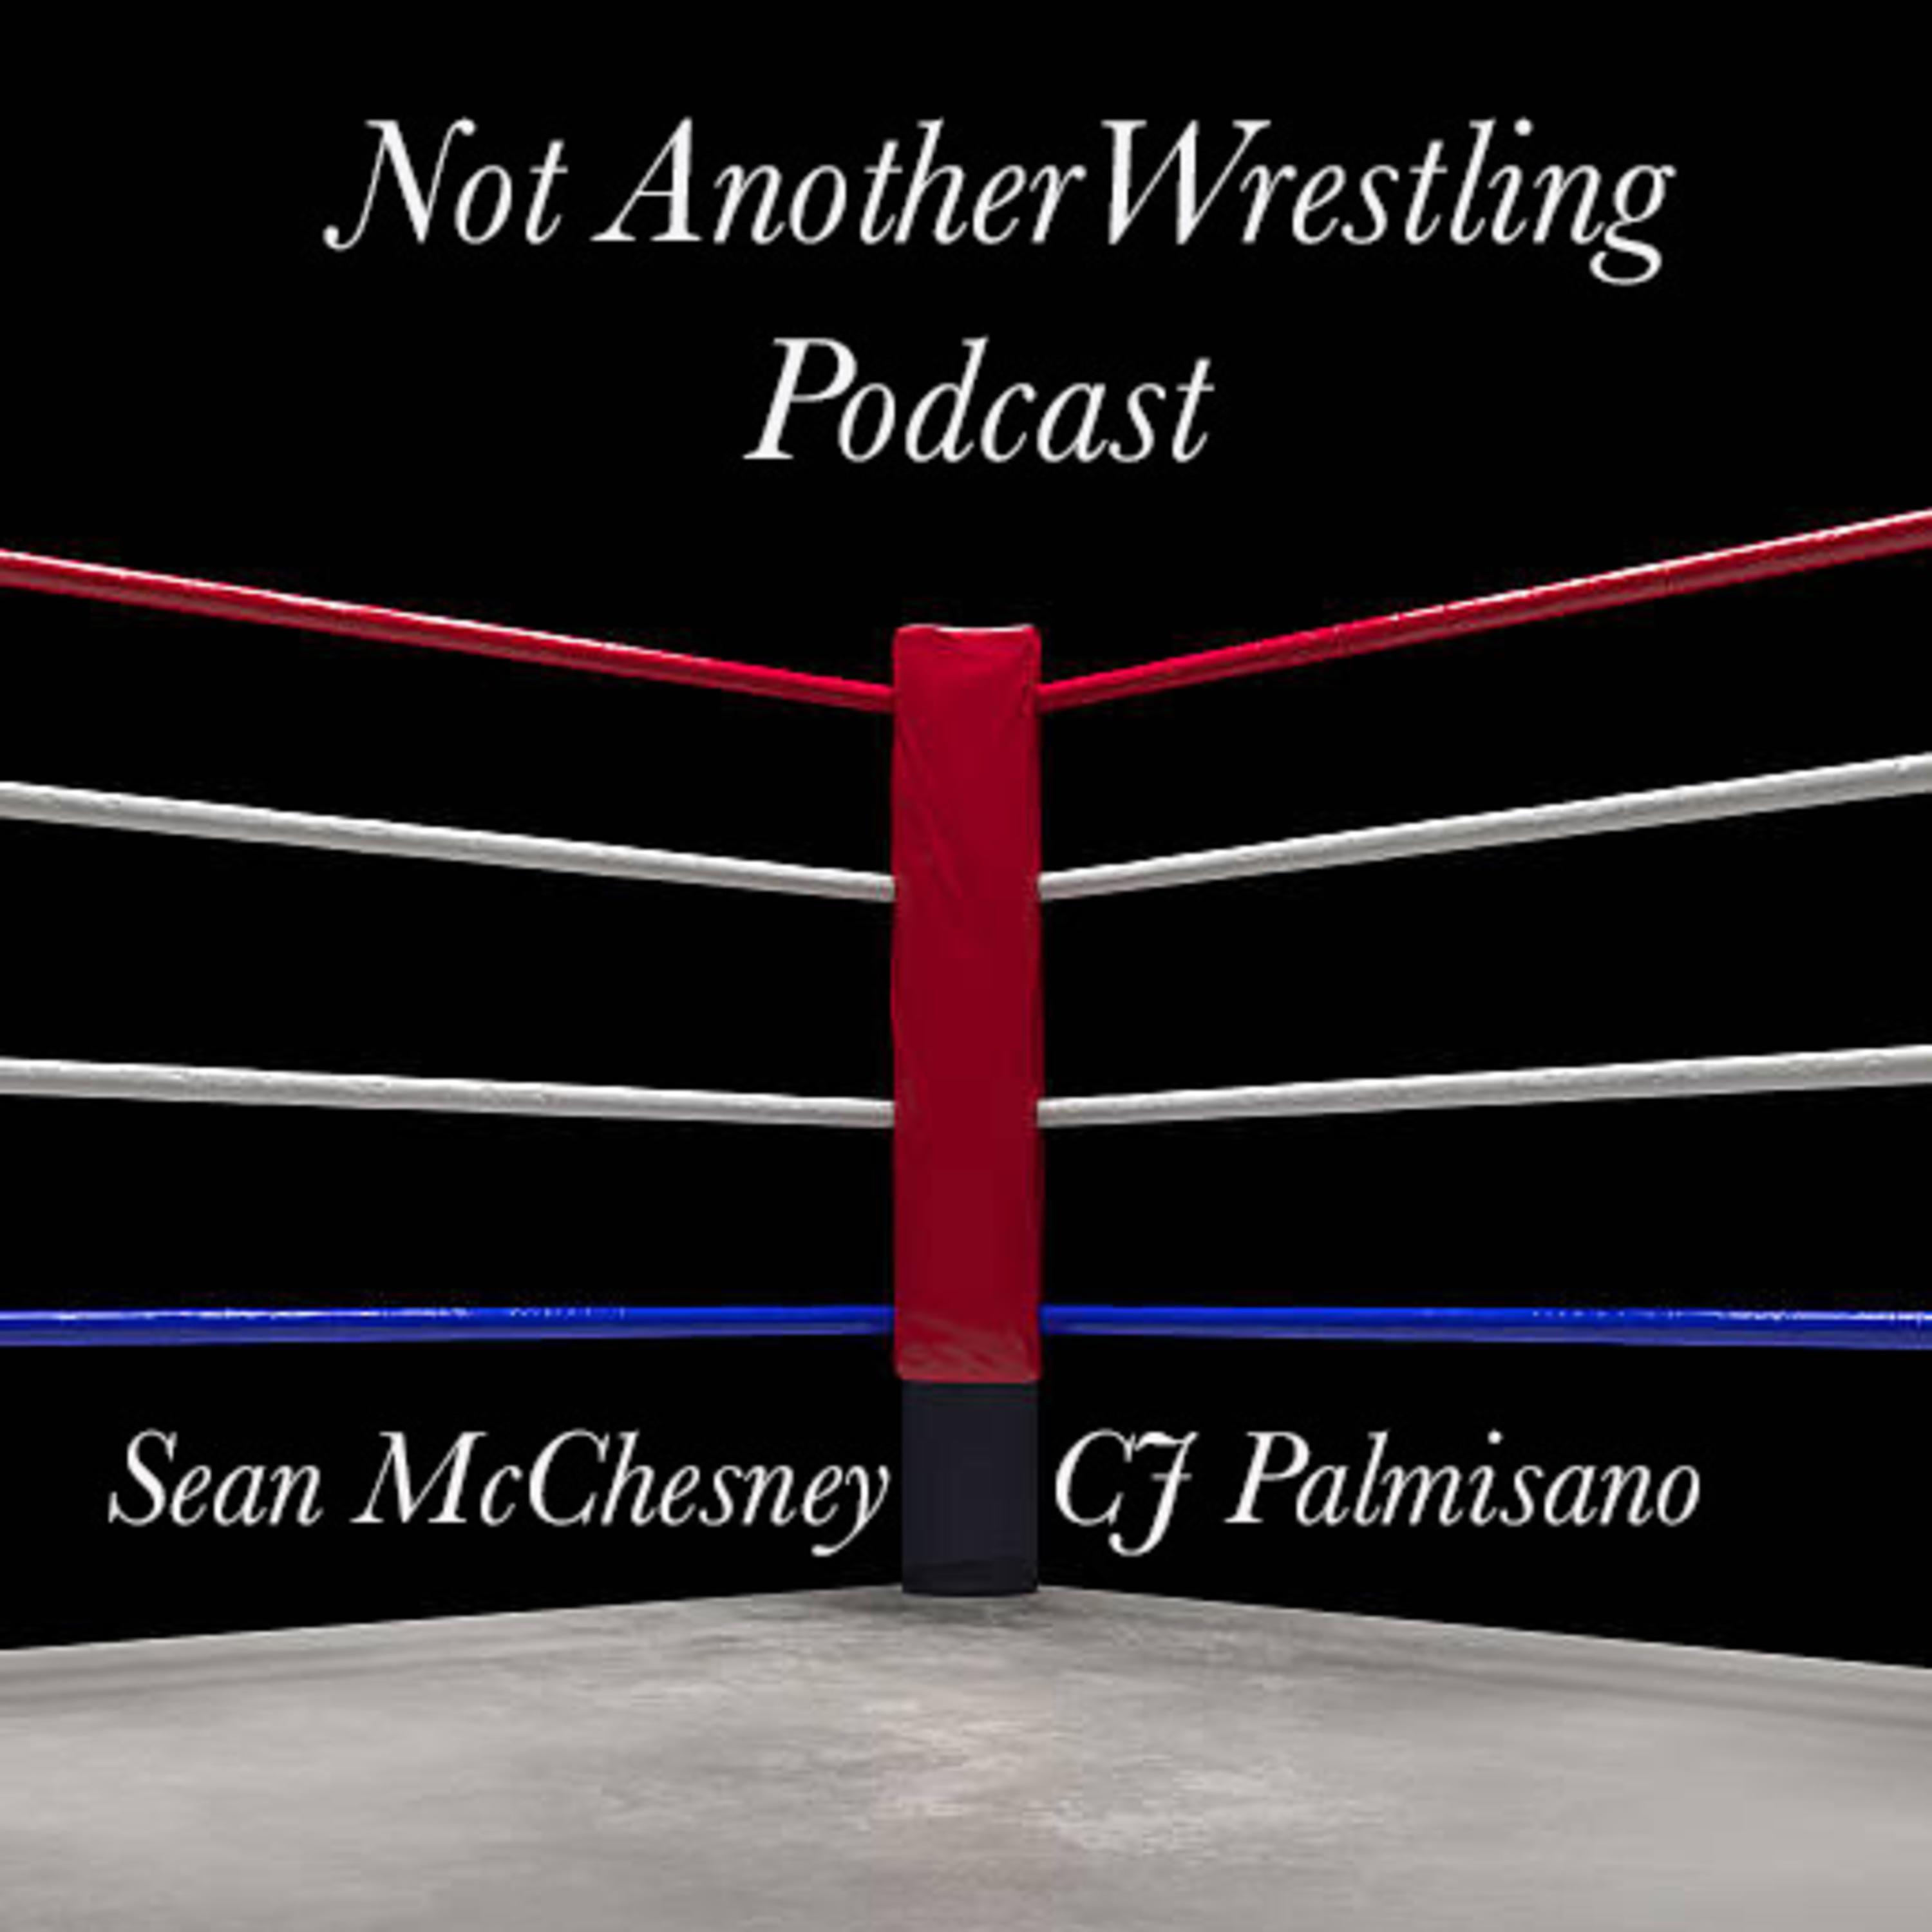 The "Not Another Wrestling" Podcast